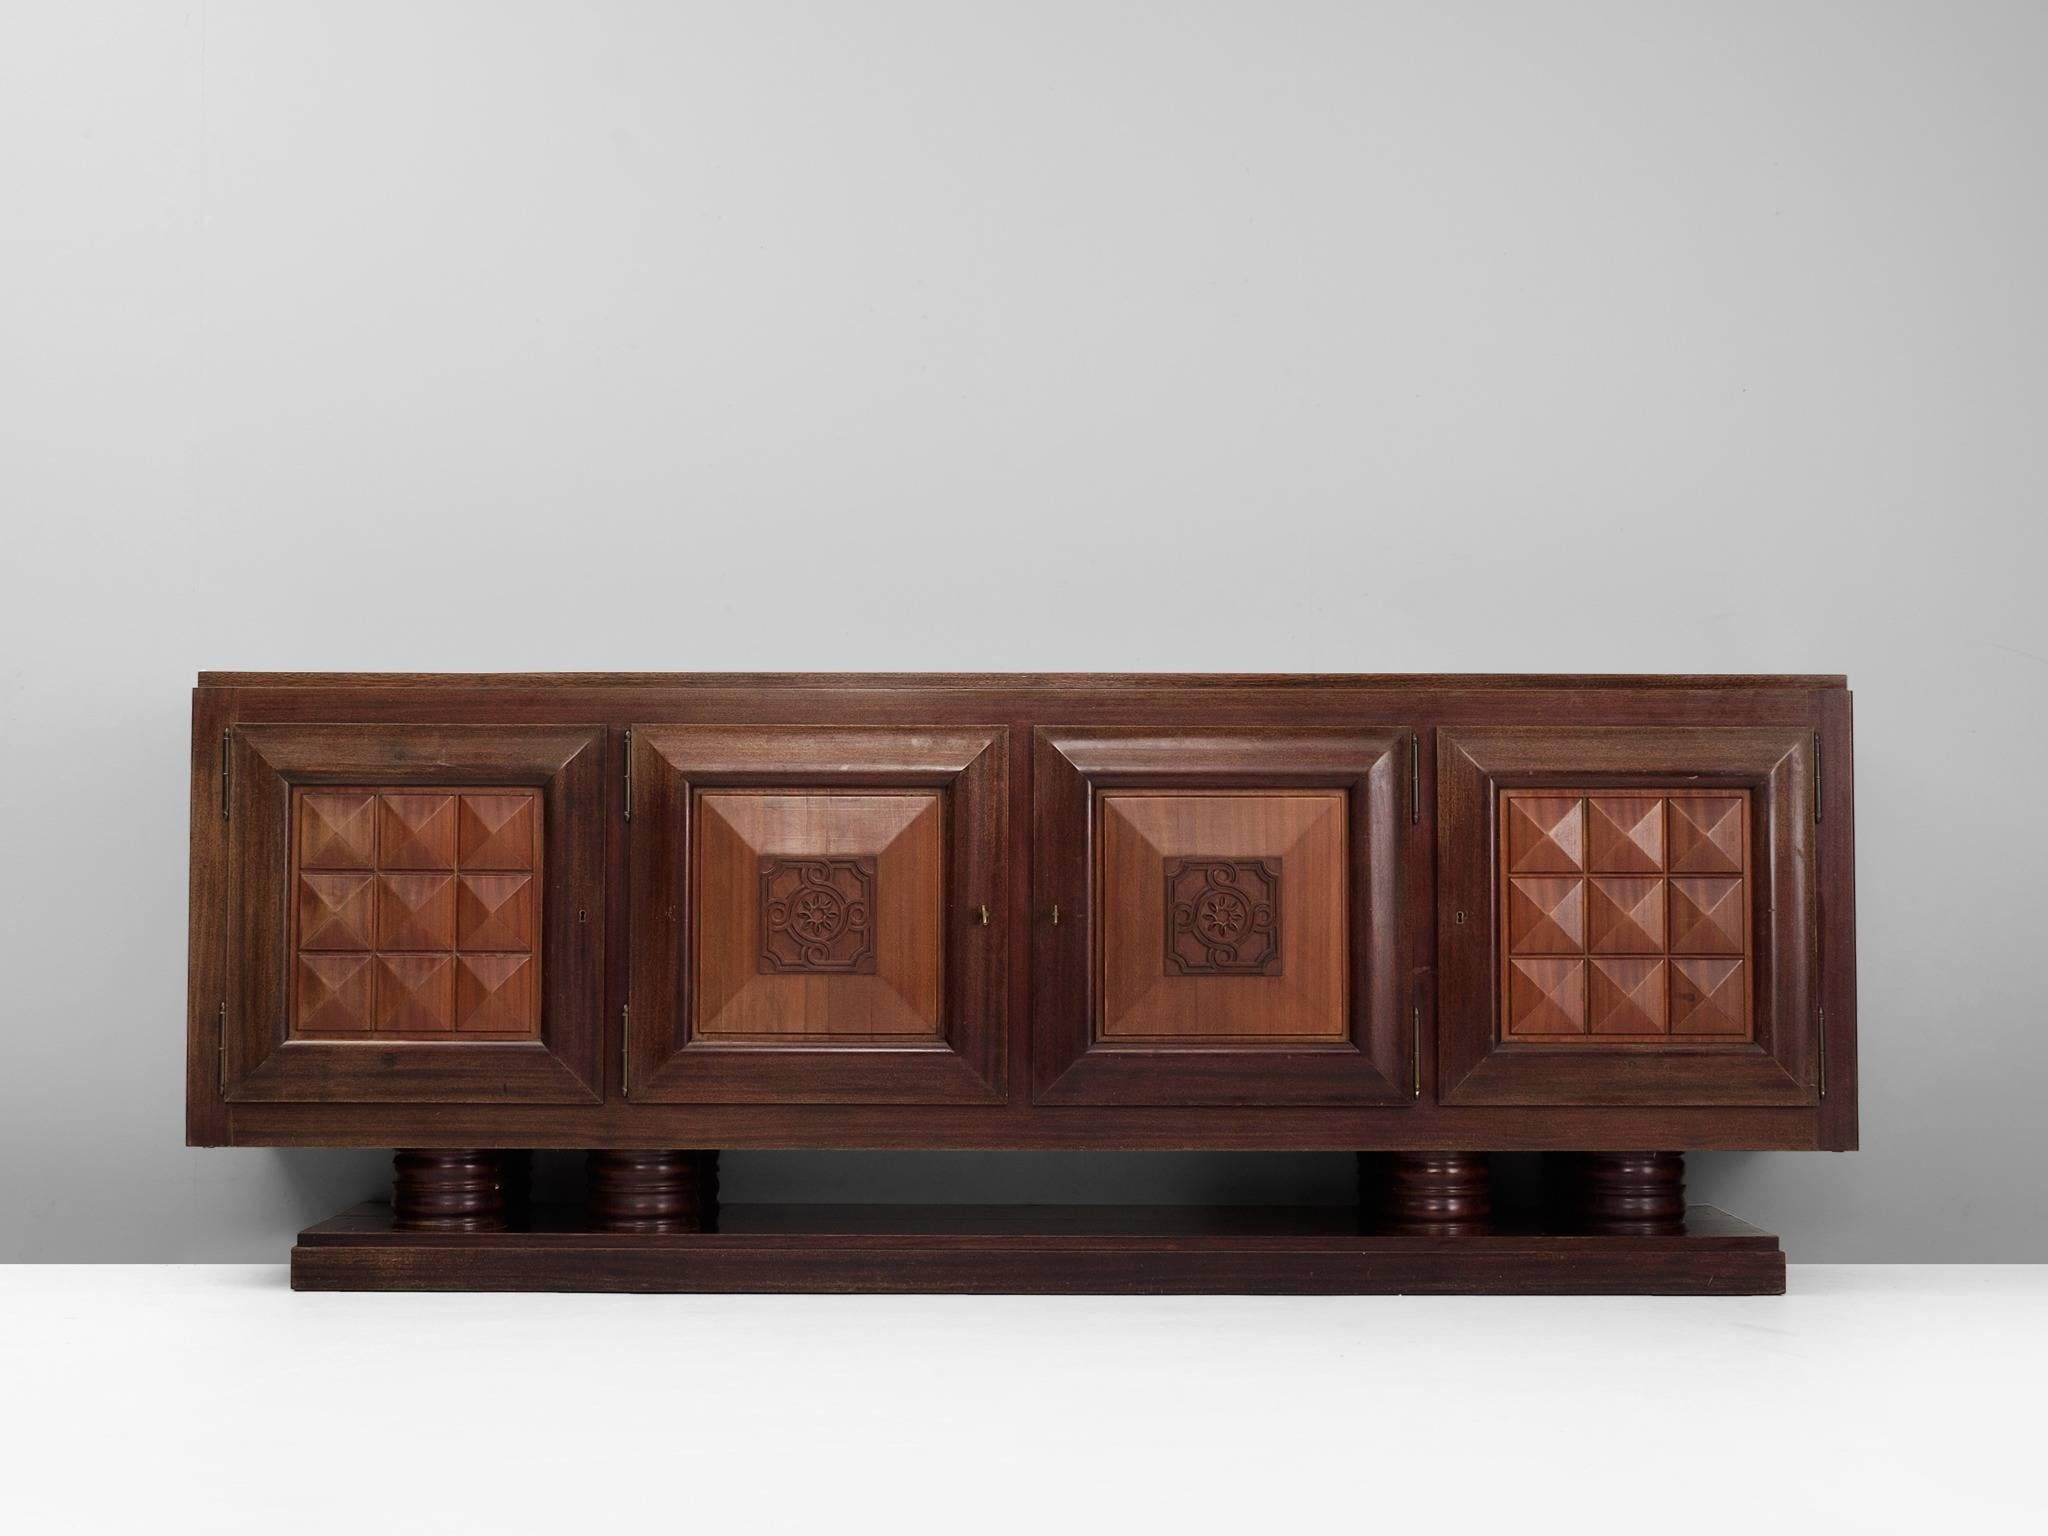 Credenza, in cedar/mahogany, by Gaston Poisson, France, 1930s. 

Sturdy credenza in oak with graphical door panels and parquet top. This four-door sideboard is equipped with several shelves and drawers which provide plenty of storage space. The